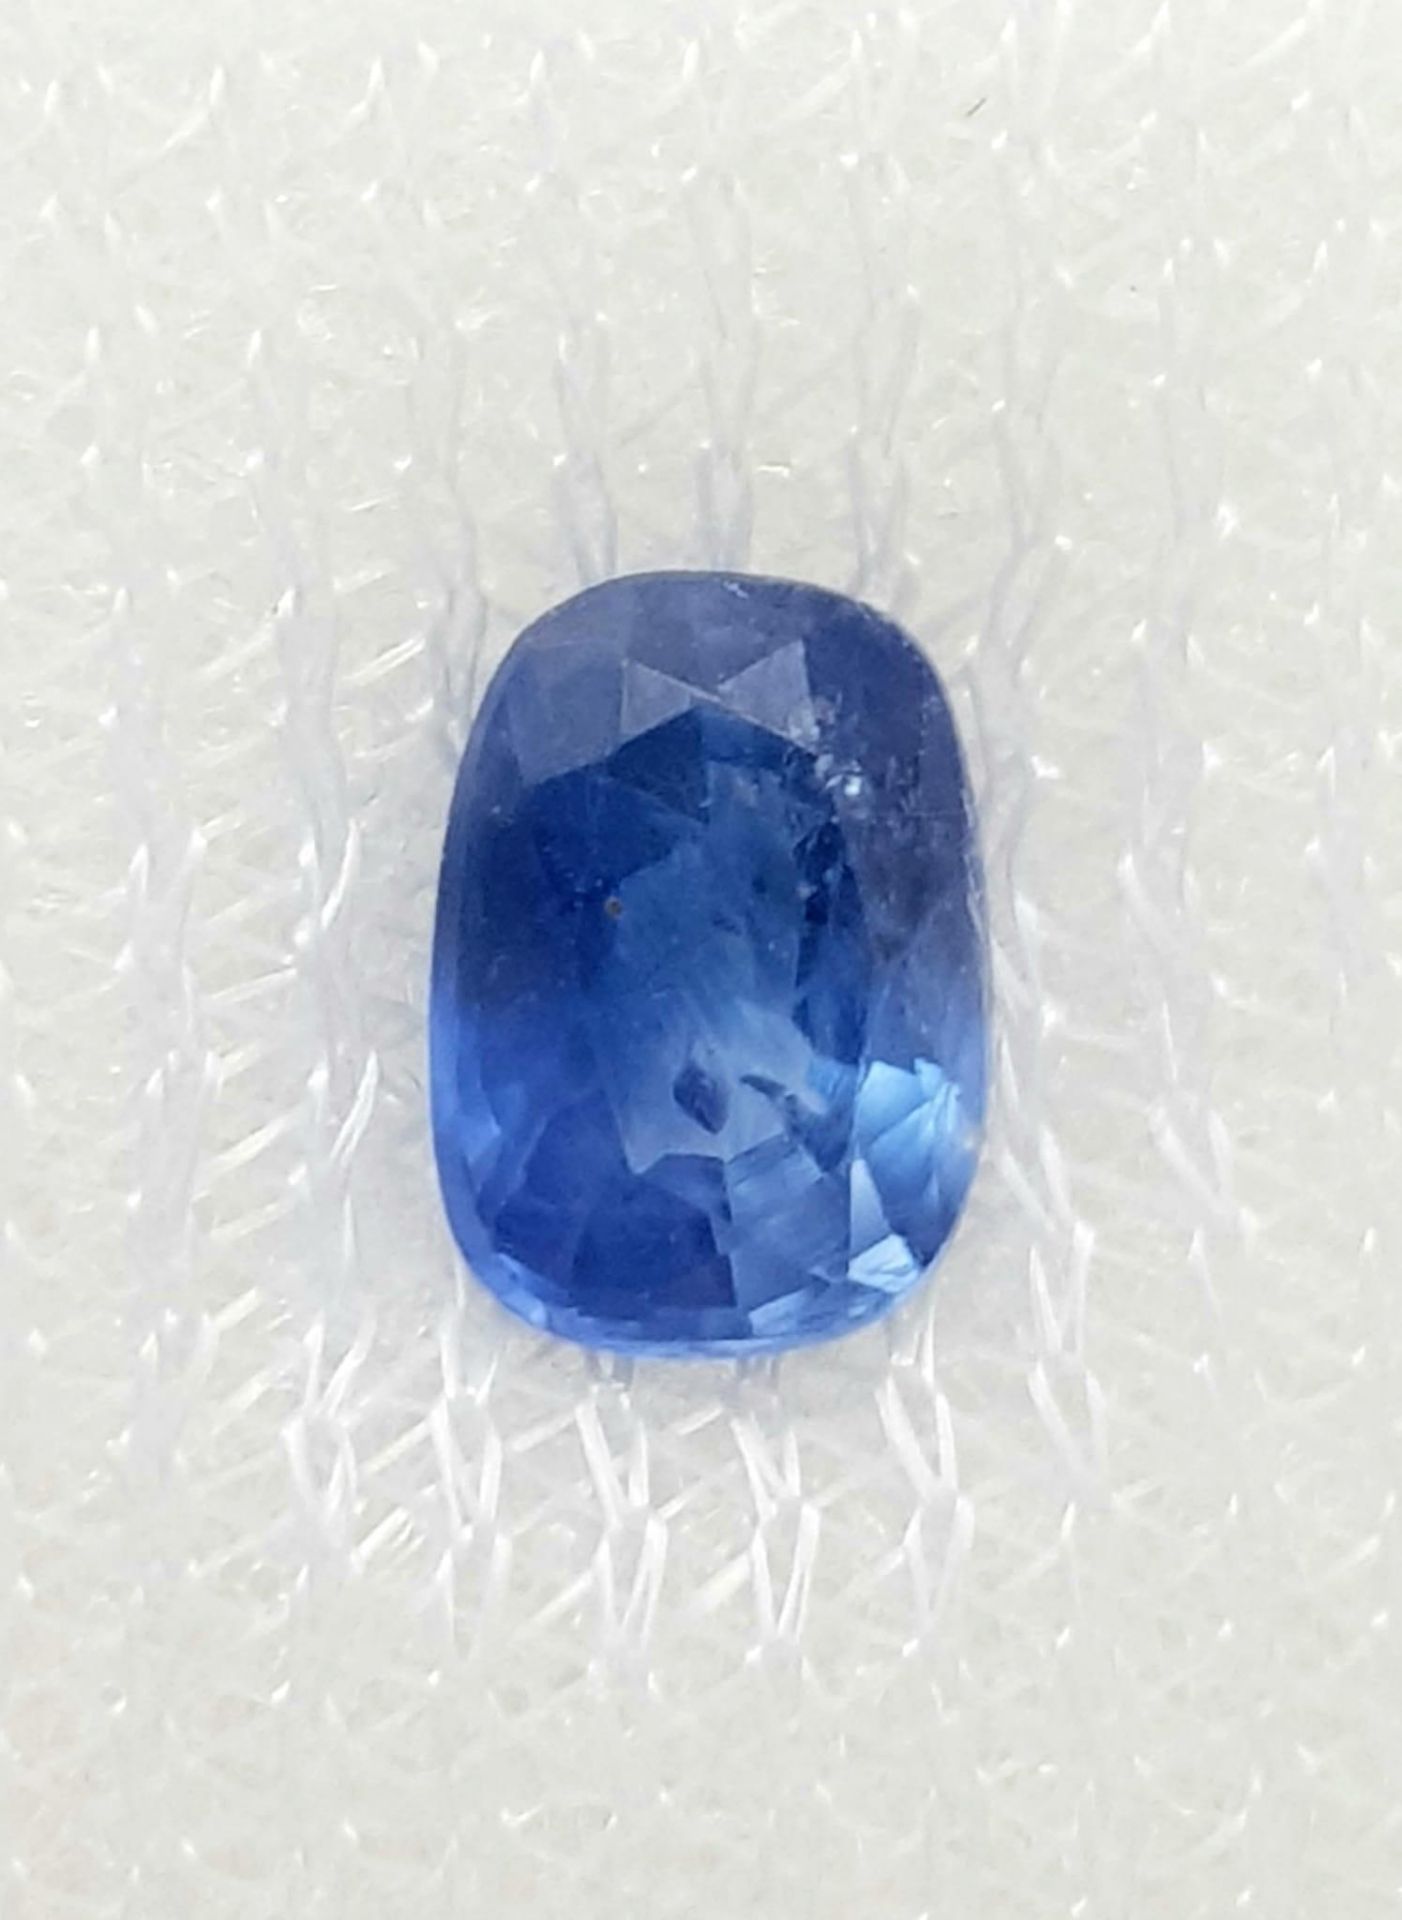 A 0.96ct Madagascan Blue Sapphire Gemstone - AIG Certified in a sealed container.